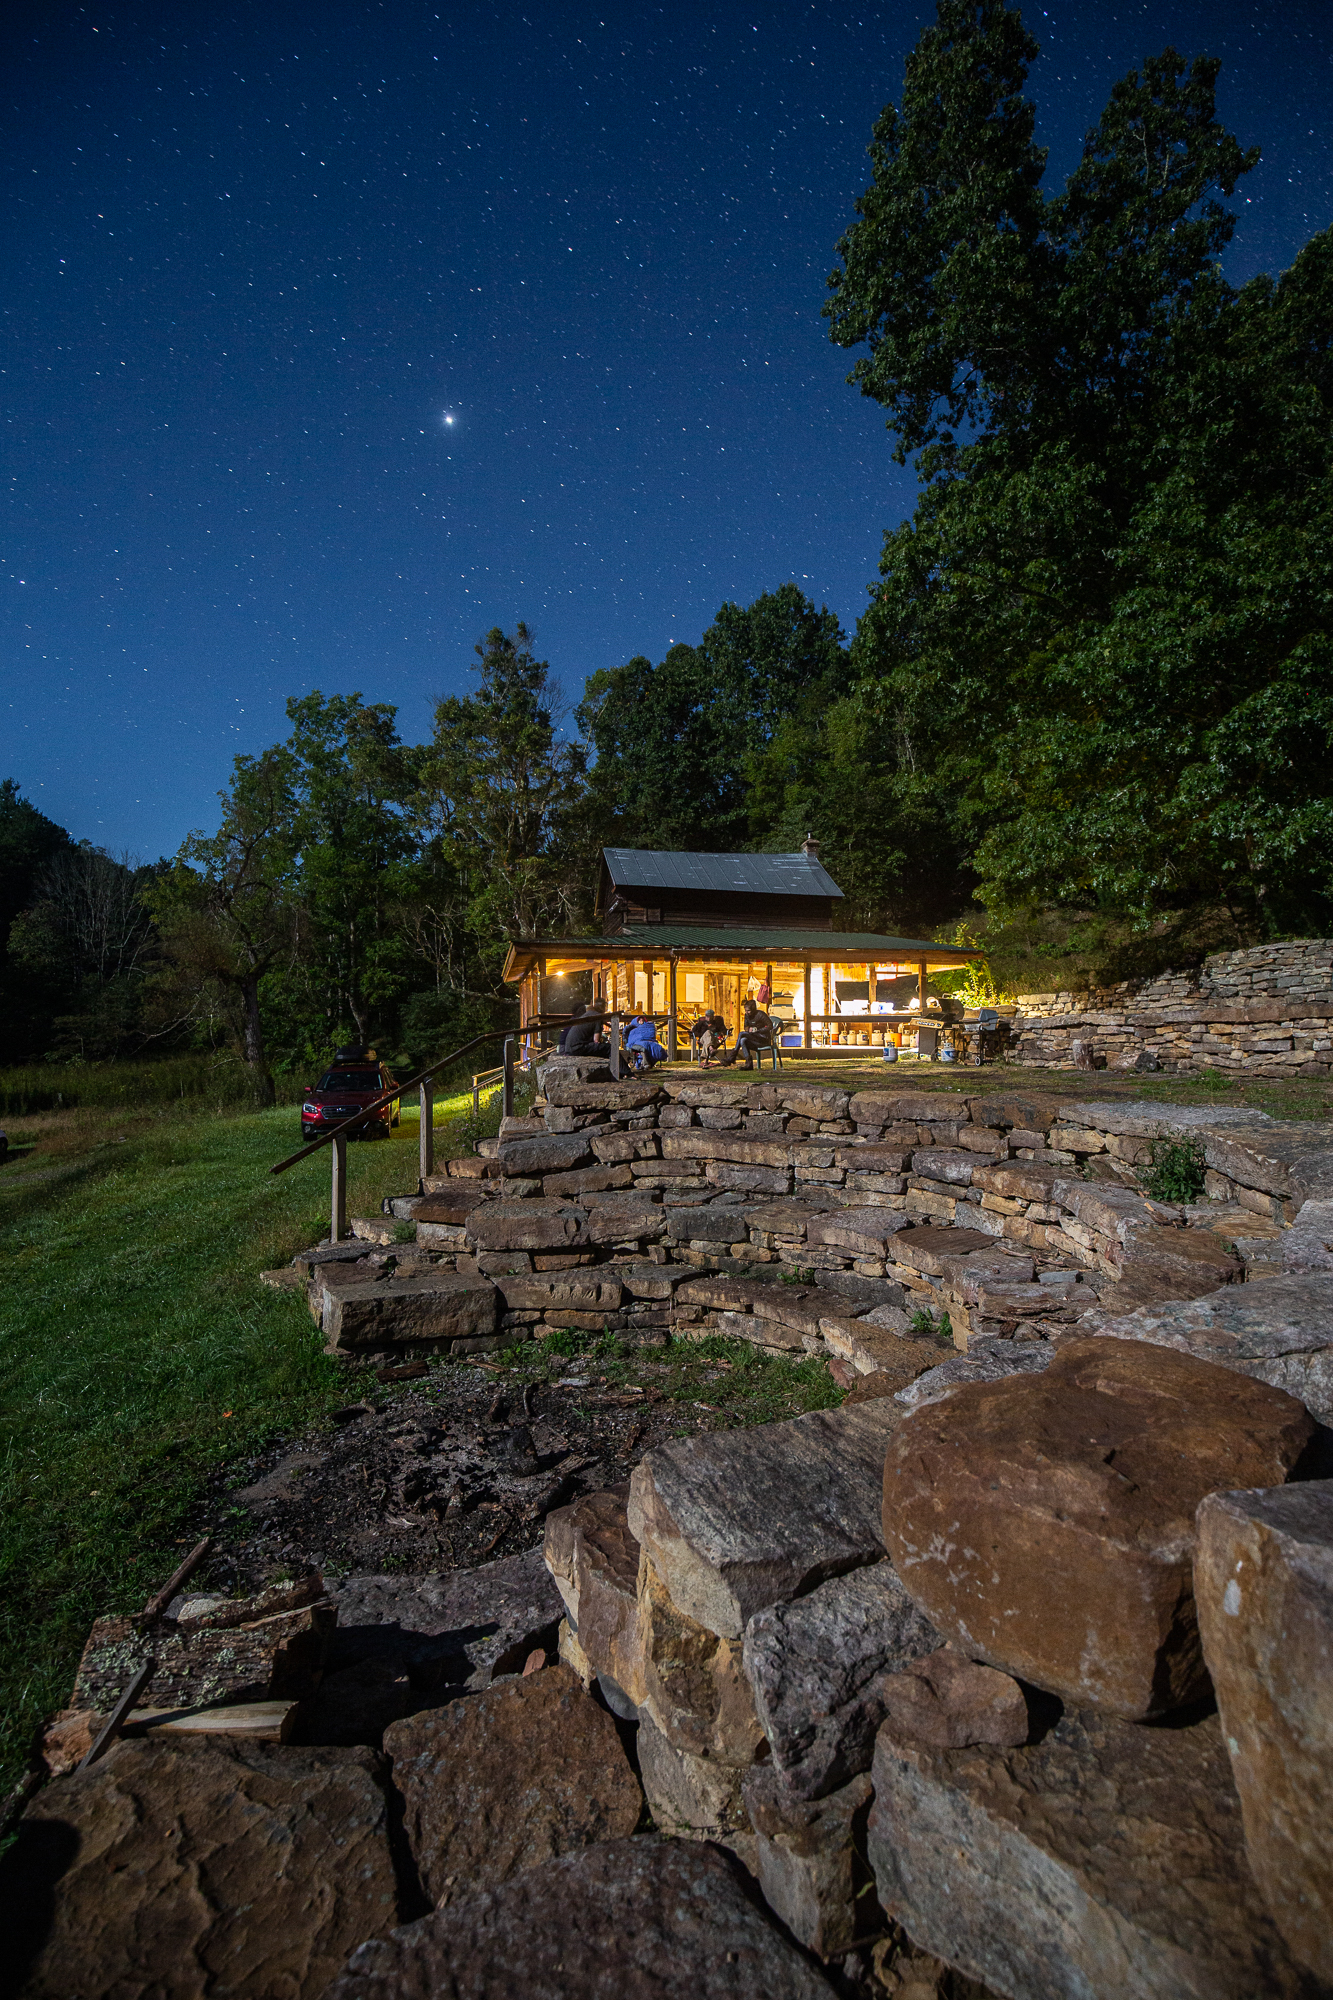 Nighttime view of the BCCS Homestead under a starry sky